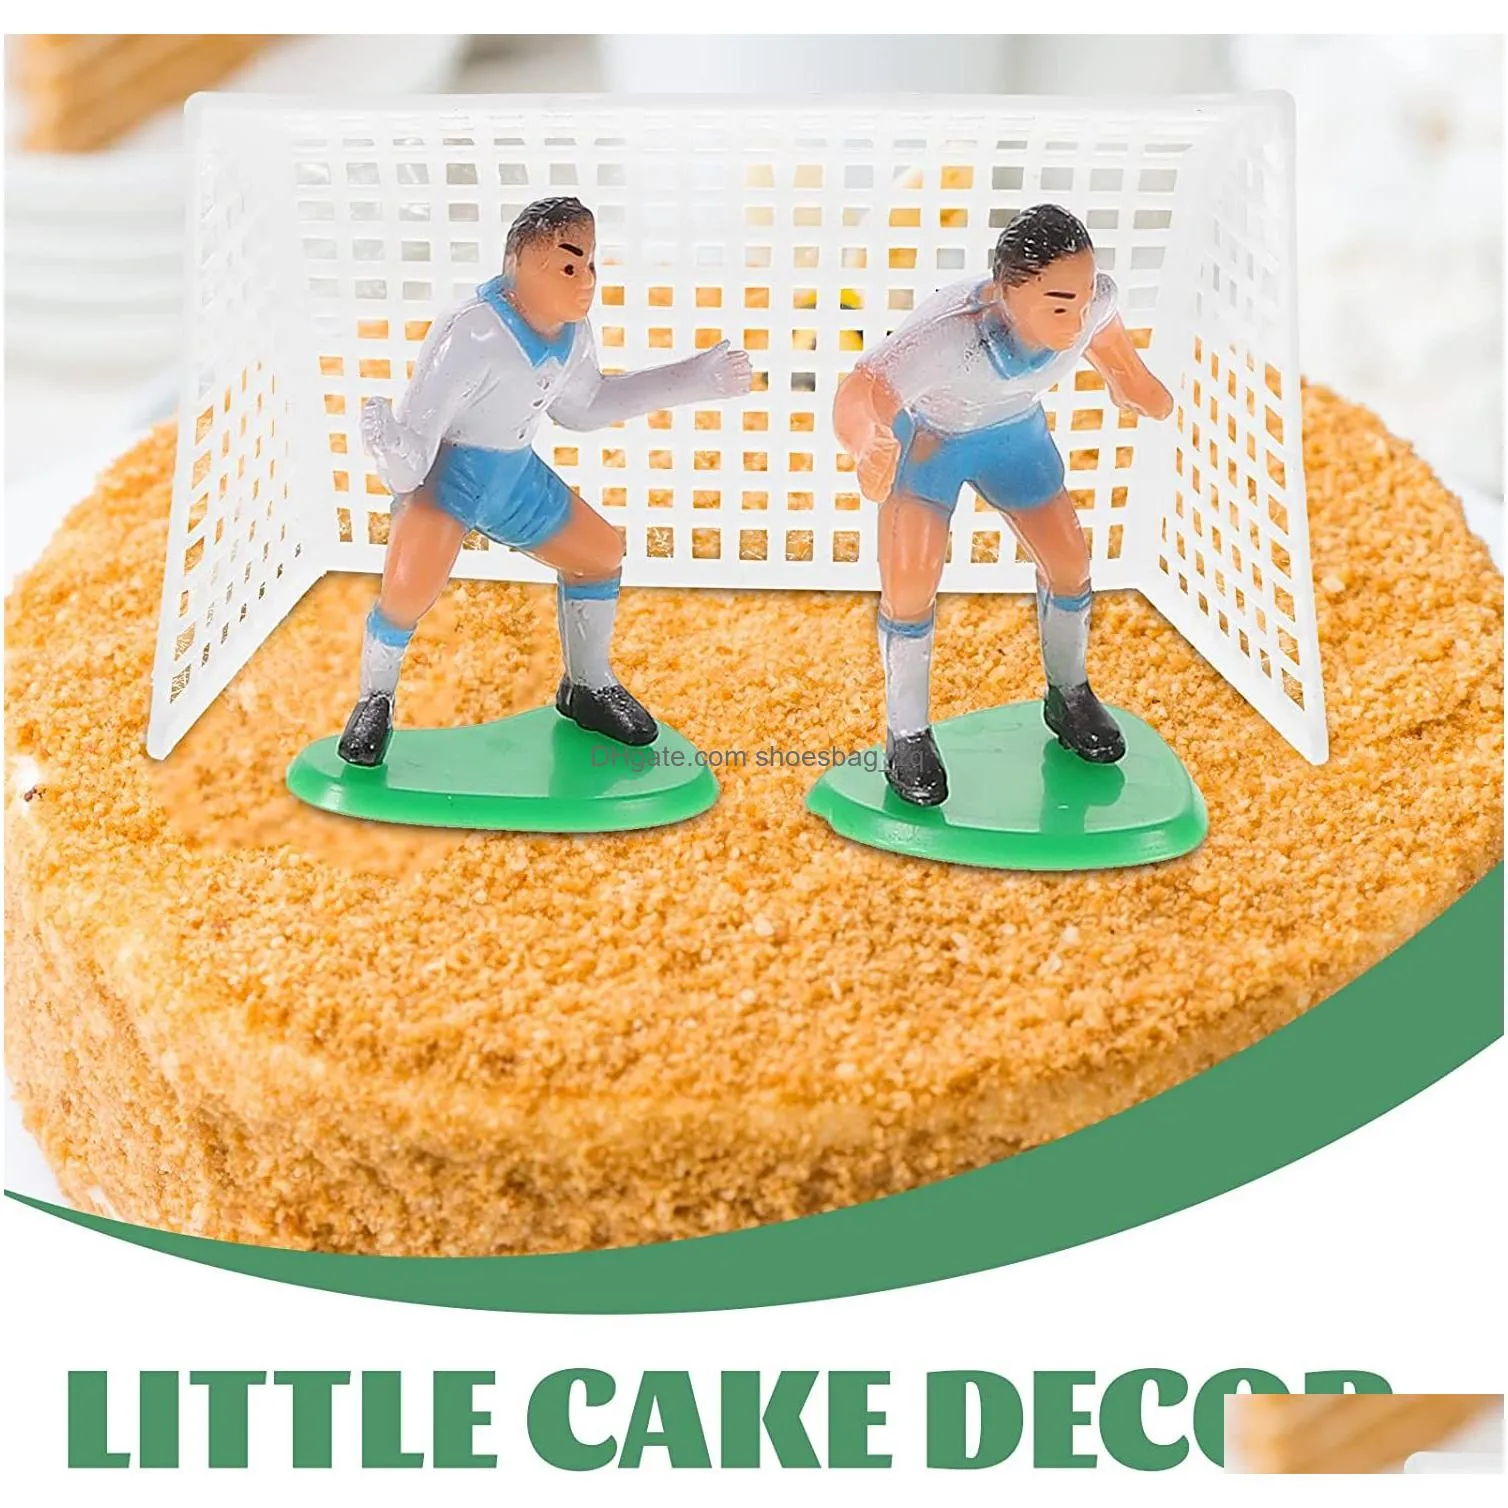 Mini Soccer Player Toy Figures Football Cupcake Topper Toys Birthday cake Decoration Sport Themed Party Supplies